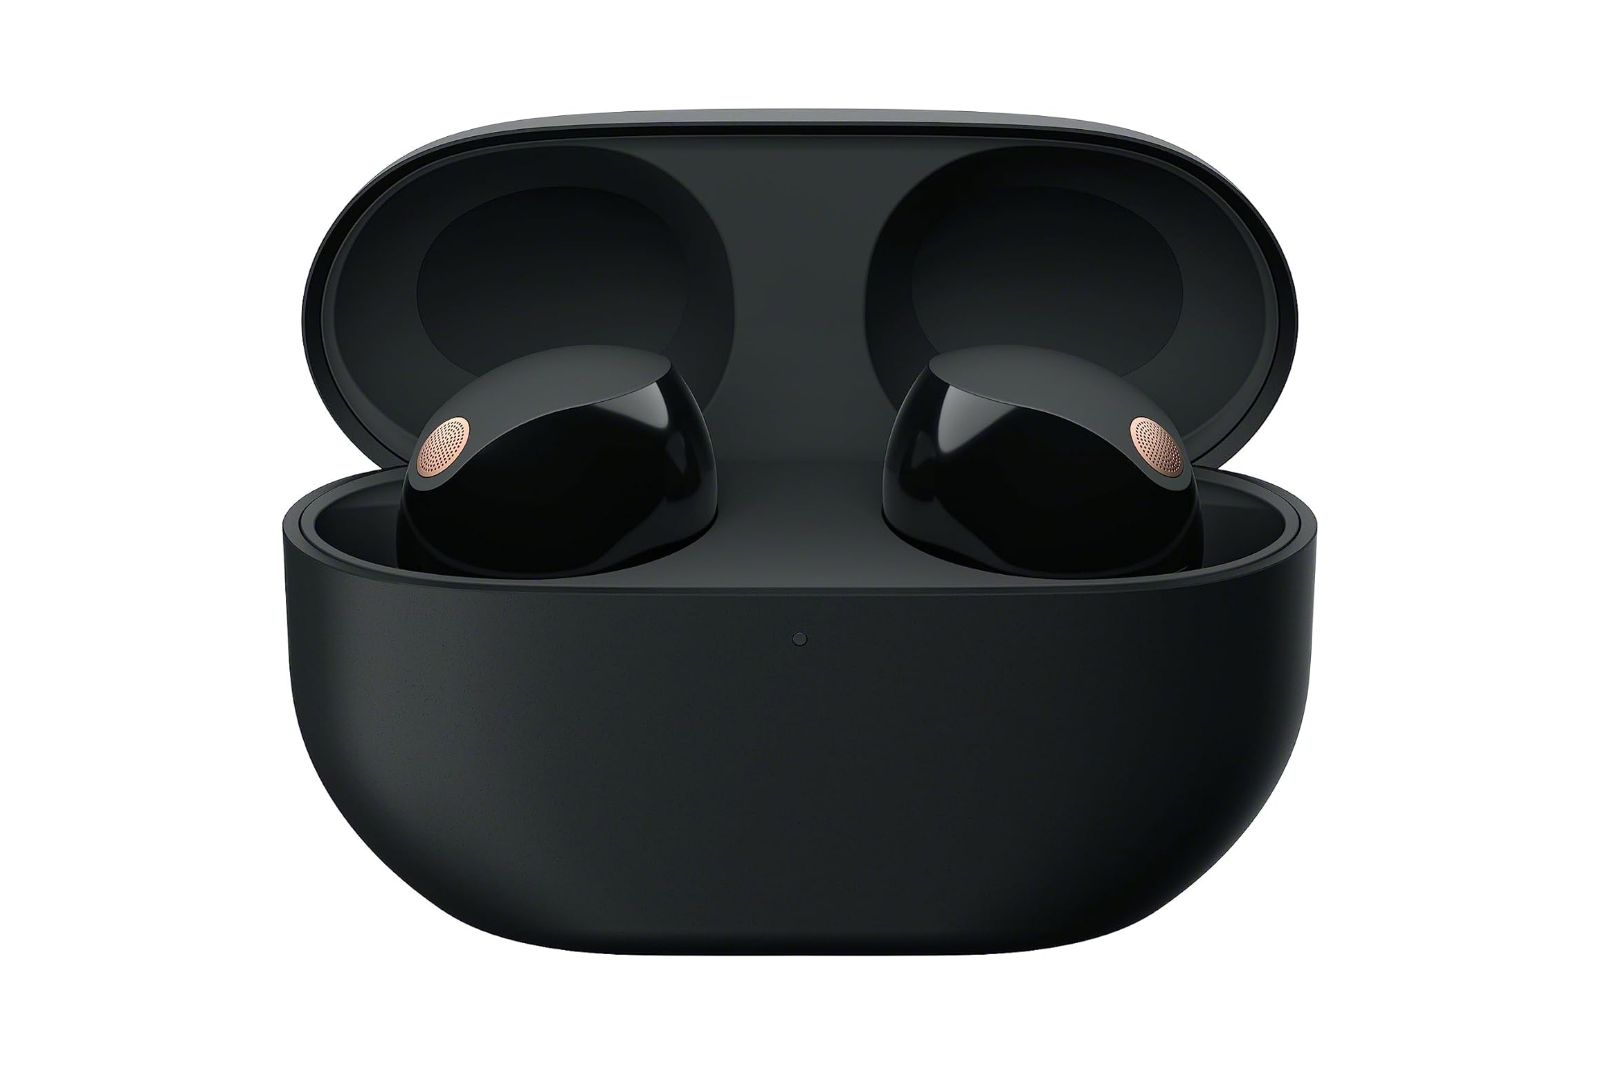 Black wireless earbuds with gold accents in a black case.